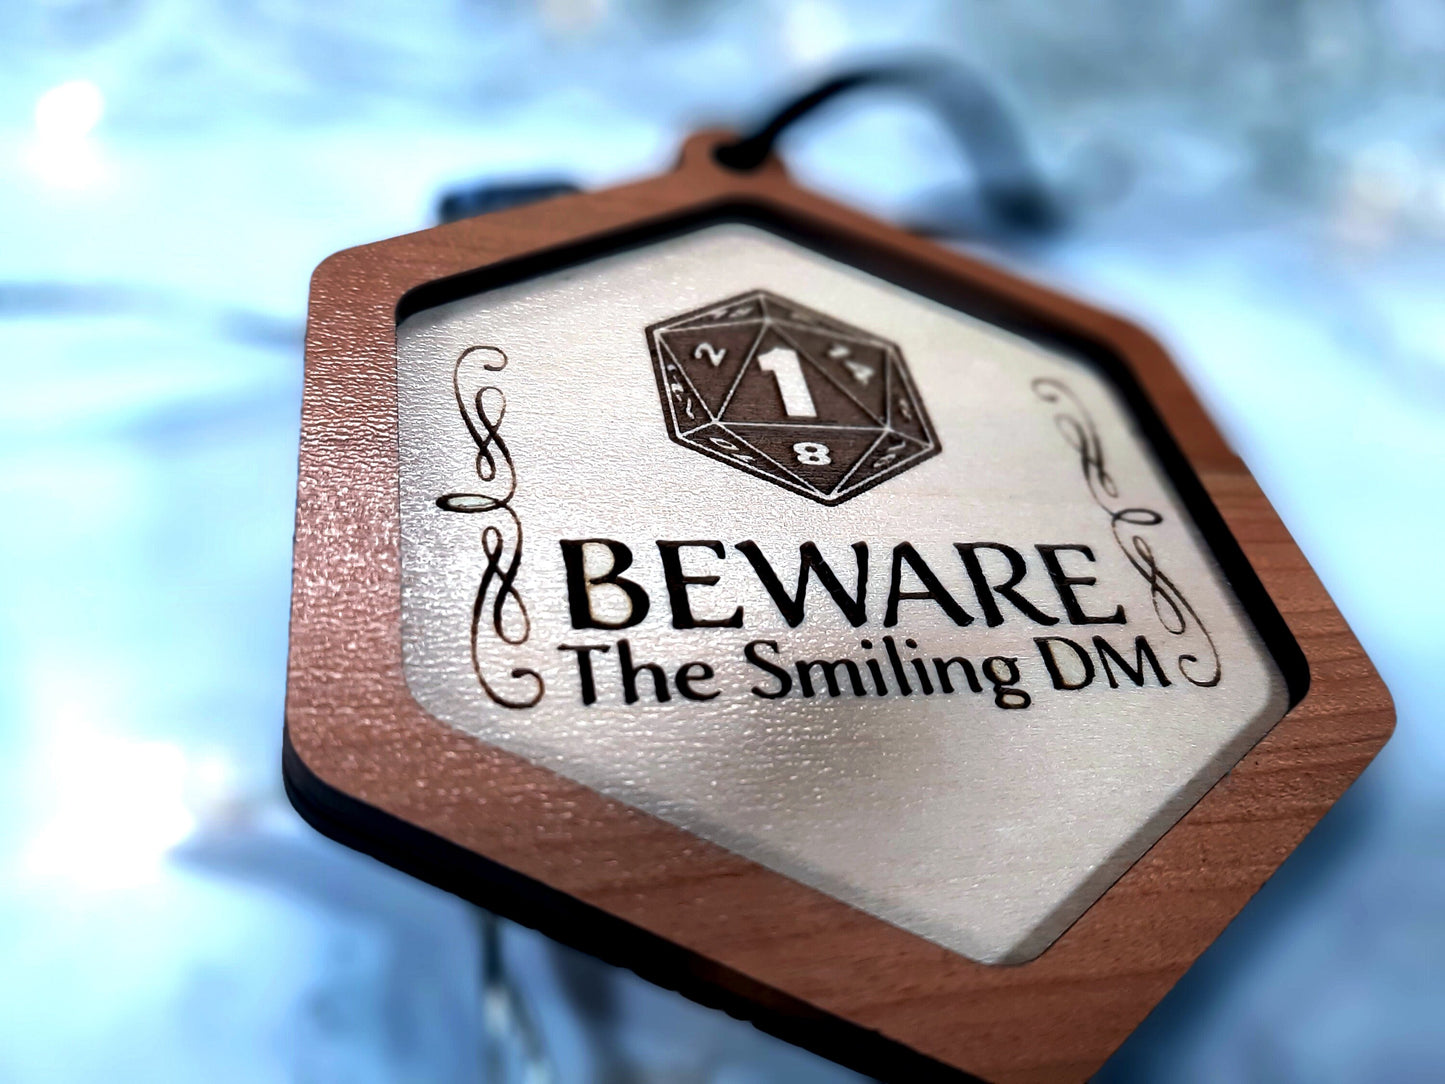 Beware the Smiling DM!   Christmas Ornament - Dungeons and Dragons, Dungeon Master gaming themed Holiday Decoration